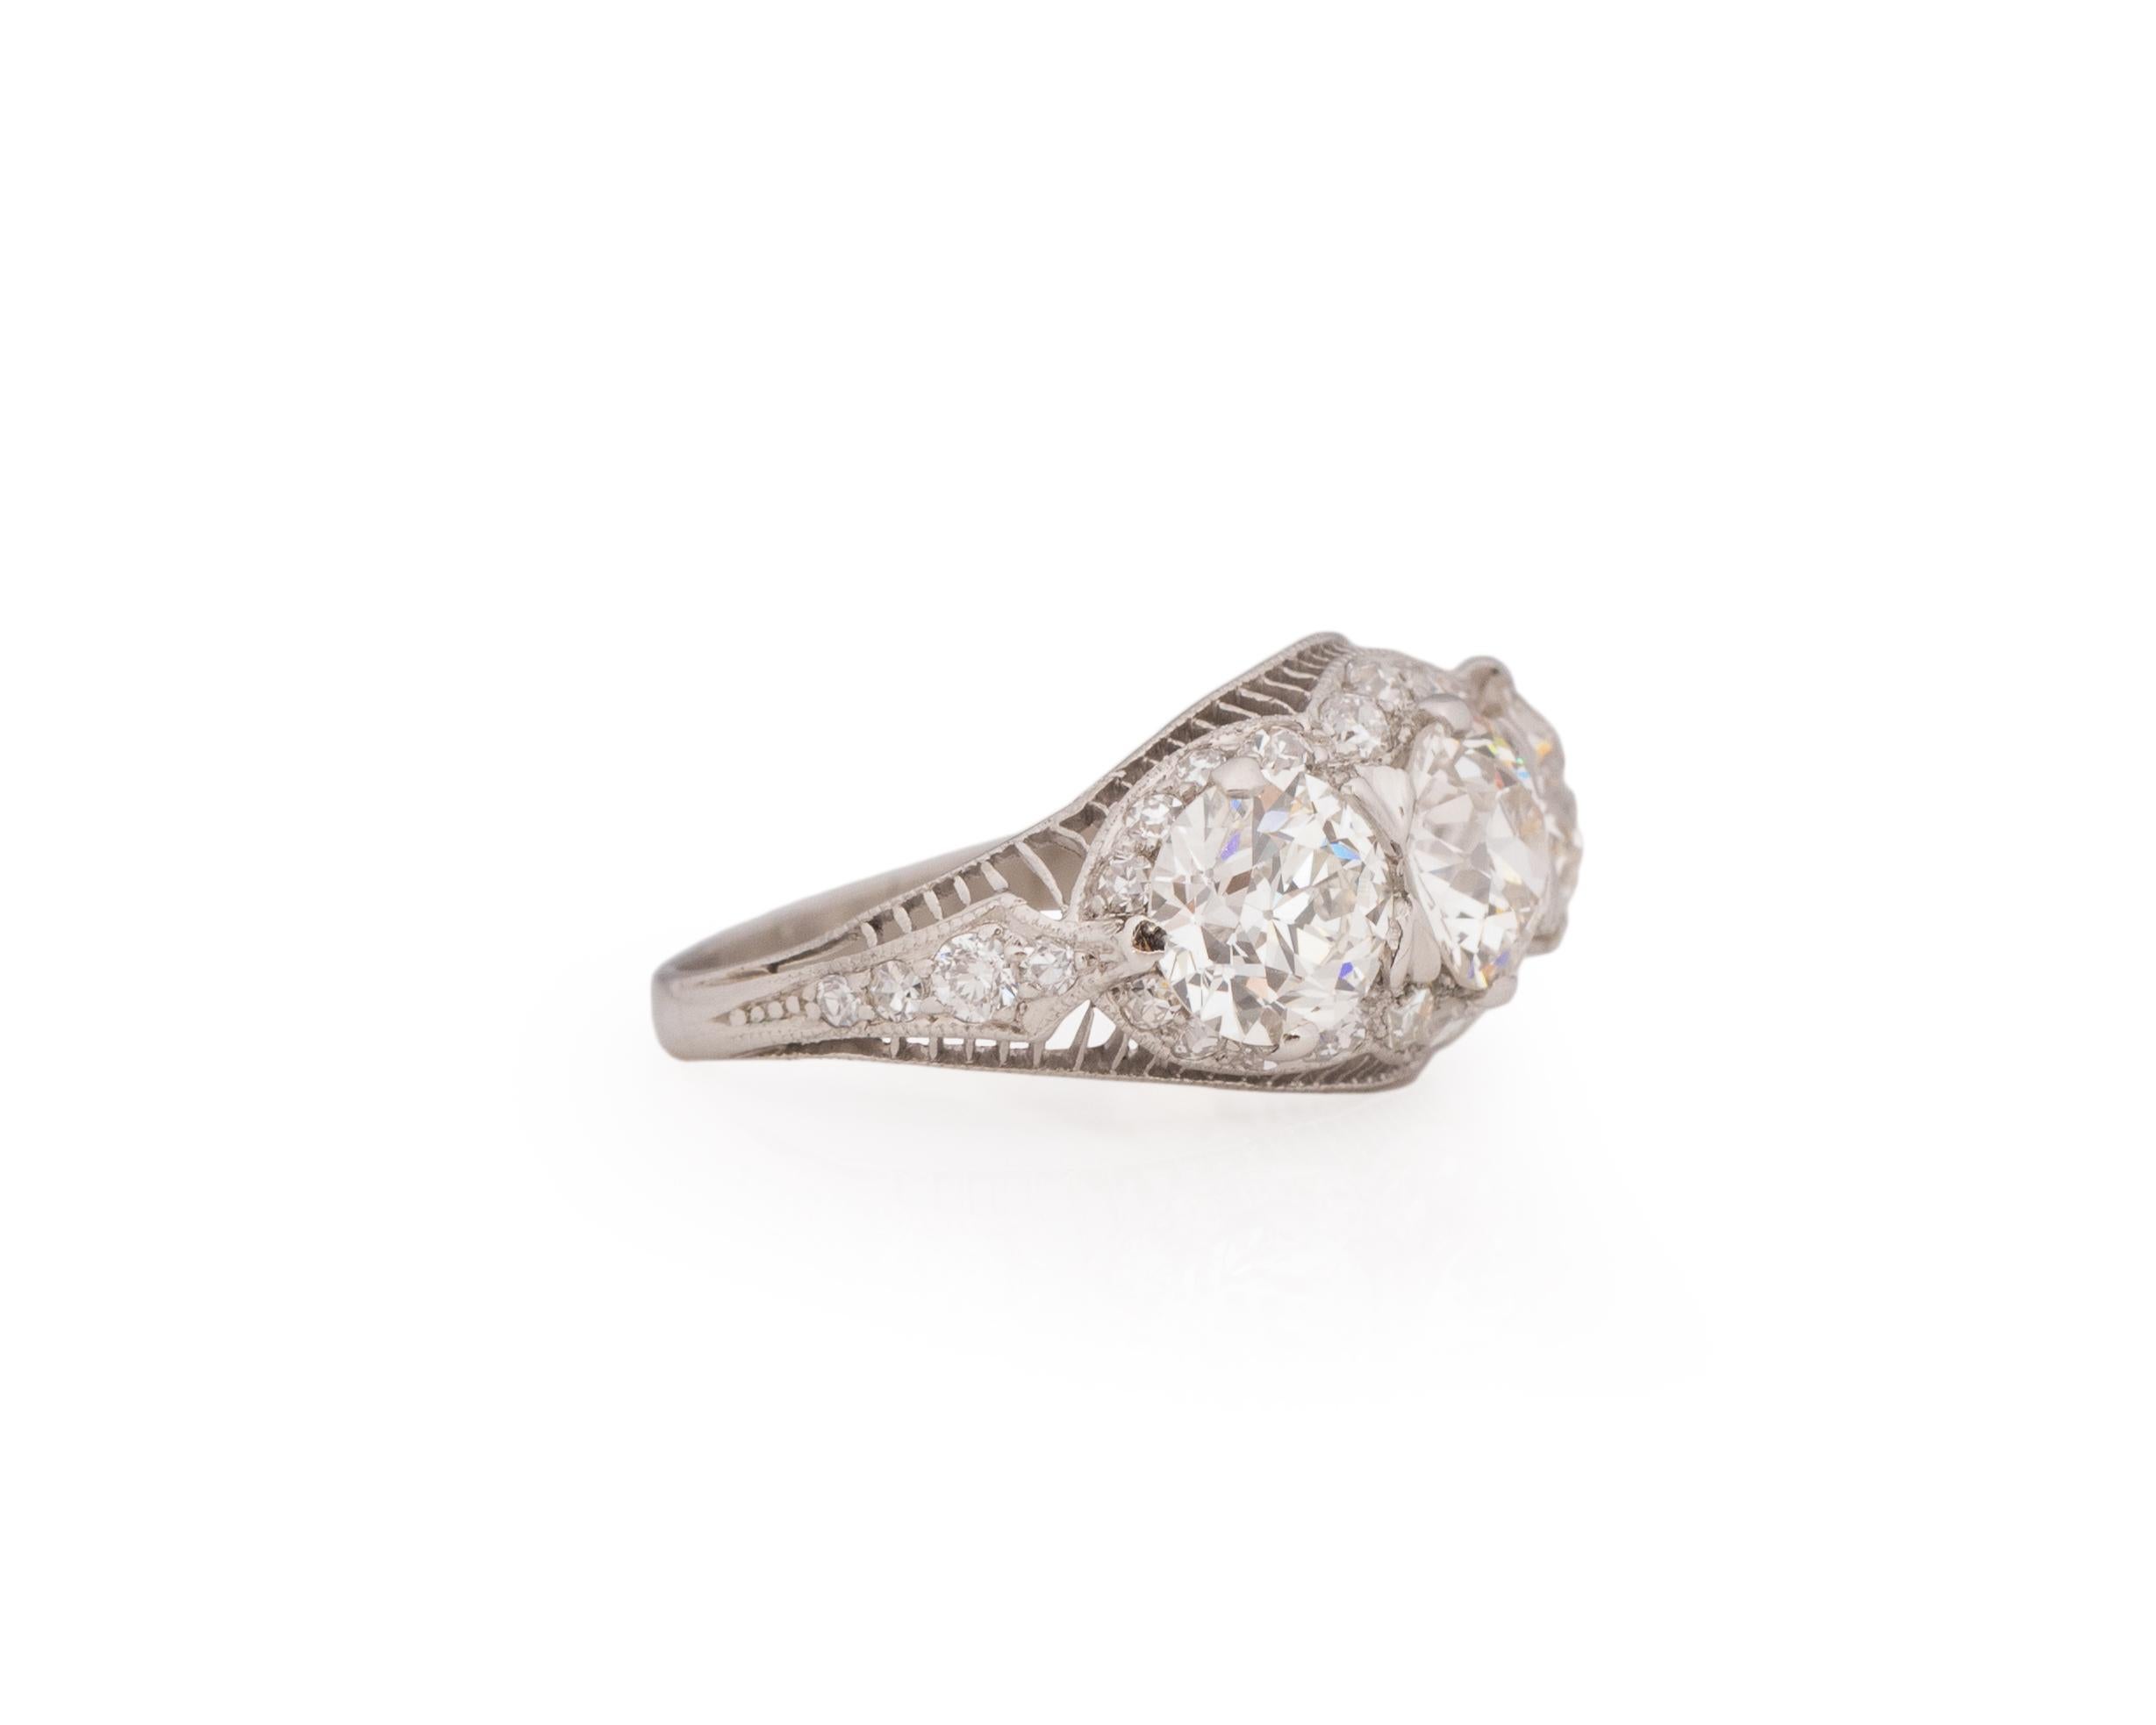 Ring Size: 6.75
Metal Type: Platinum [Hallmarked, and Tested]
Weight: 3.9 grams

This ring includes 3 GIA reports for each of of the 3 center stones.

Diamond 1 (Center Stone)
Diamond Details:
GIA REPORT #: 1226484595
Weight: 1.02ct
Cut: Old